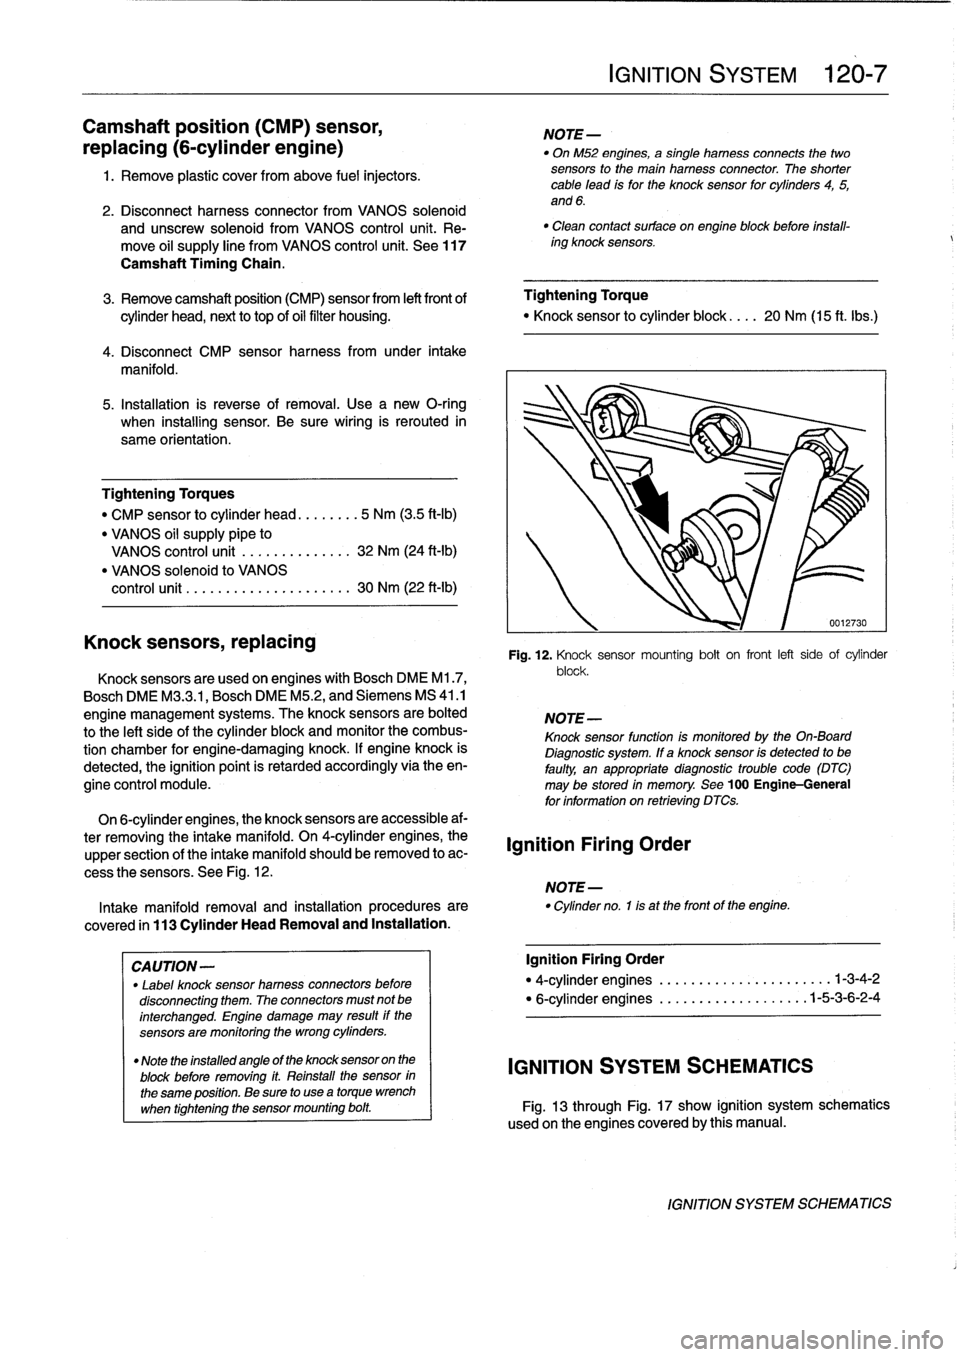 BMW 318i 1997 E36 Service Manual 
Camshaft
position
(CMP)
sensor,

replacing
(6-cylinder
engine)

1
.
Remove
plastic
cover
from
above
fuel
injectors
.

2
.
Disconnect
harness
connector
from
VANOS
solenoid

and
unscrew
solenoid
from
V